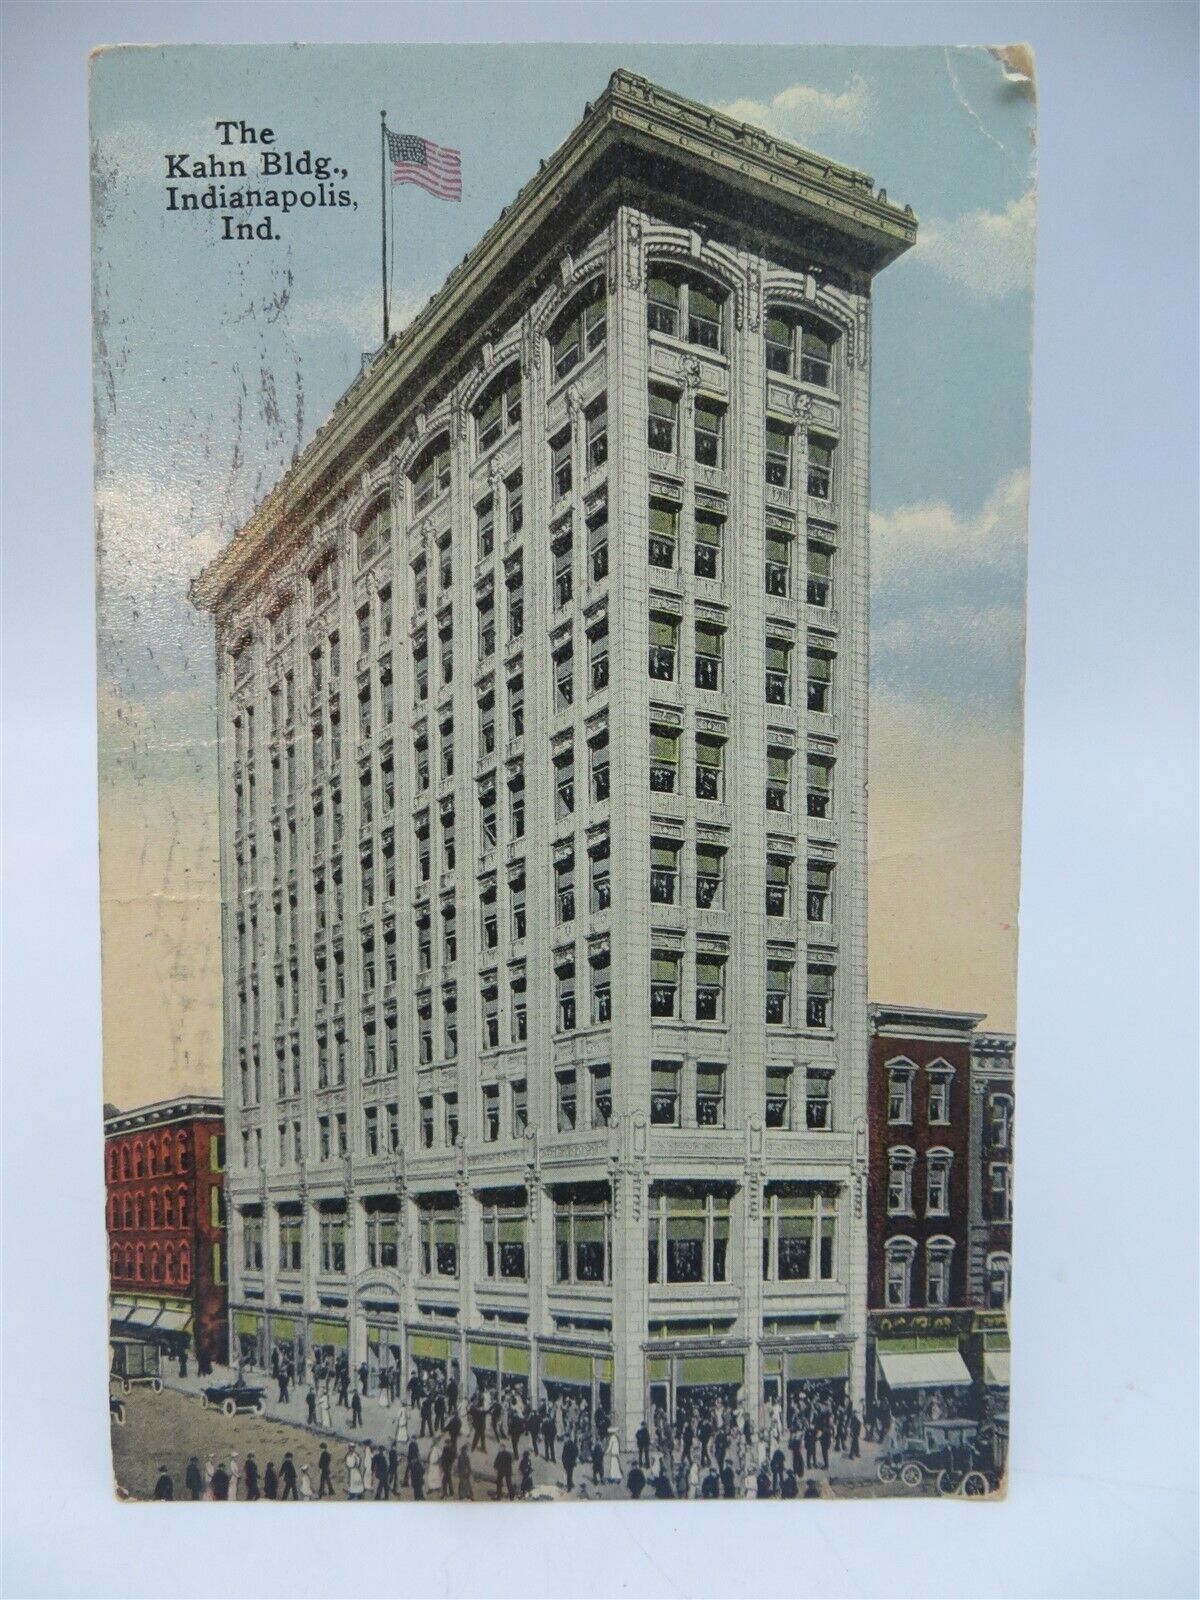 Vintage Postcard - The Kahn Building, Indianapolis, IN, Postmarked 1917